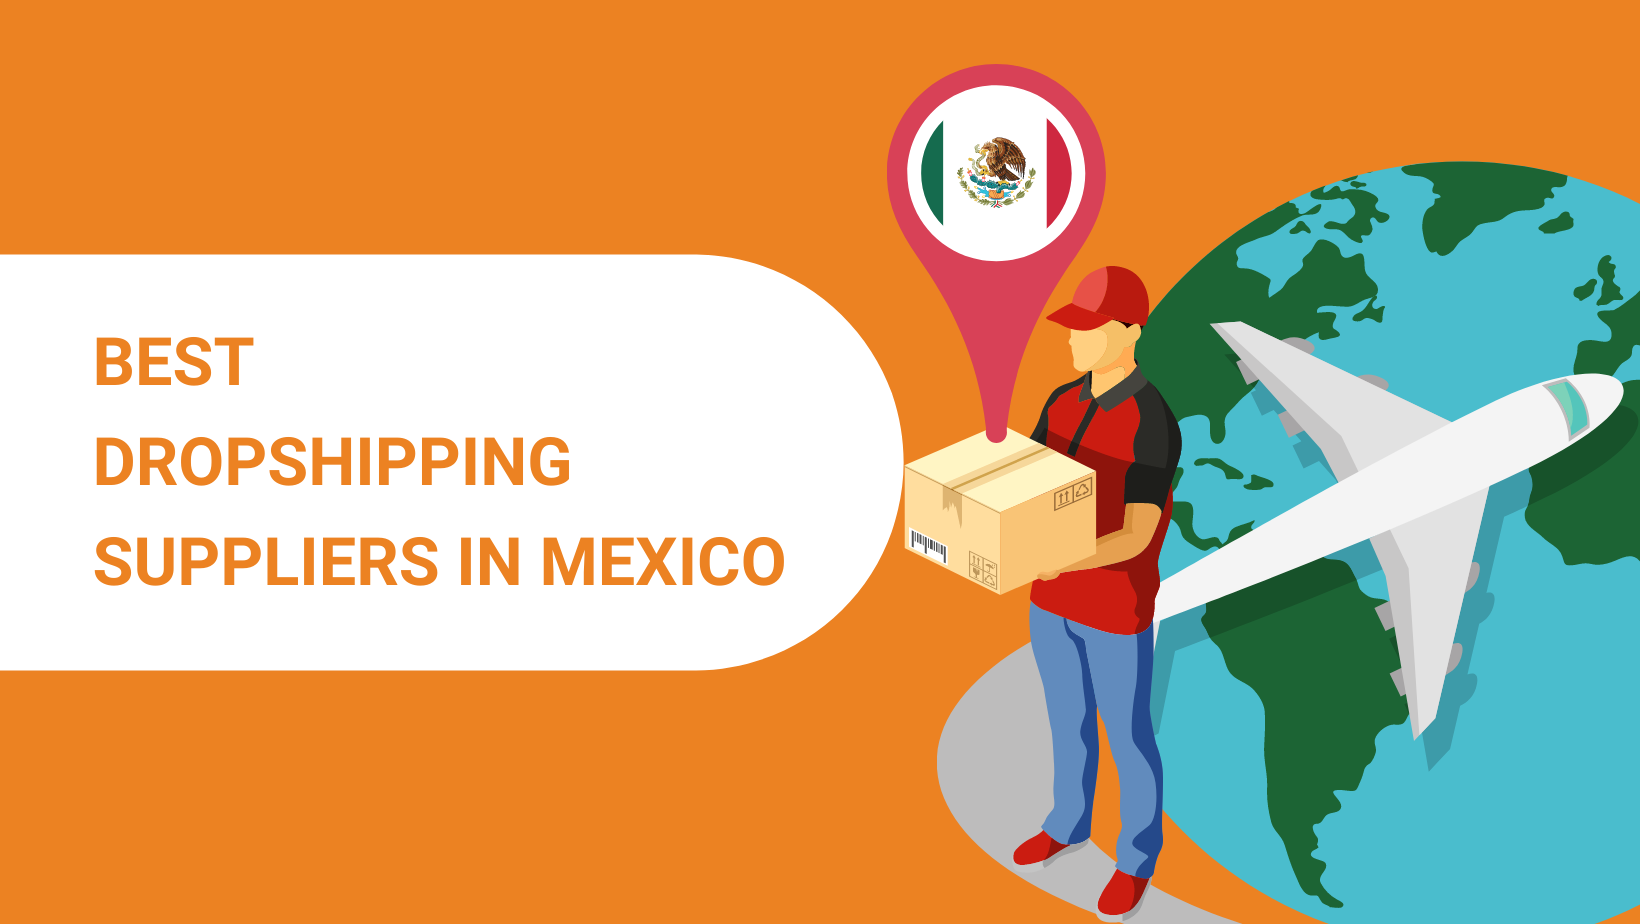 BEST DROPSHIPPING SUPPLIERS IN MEXICO